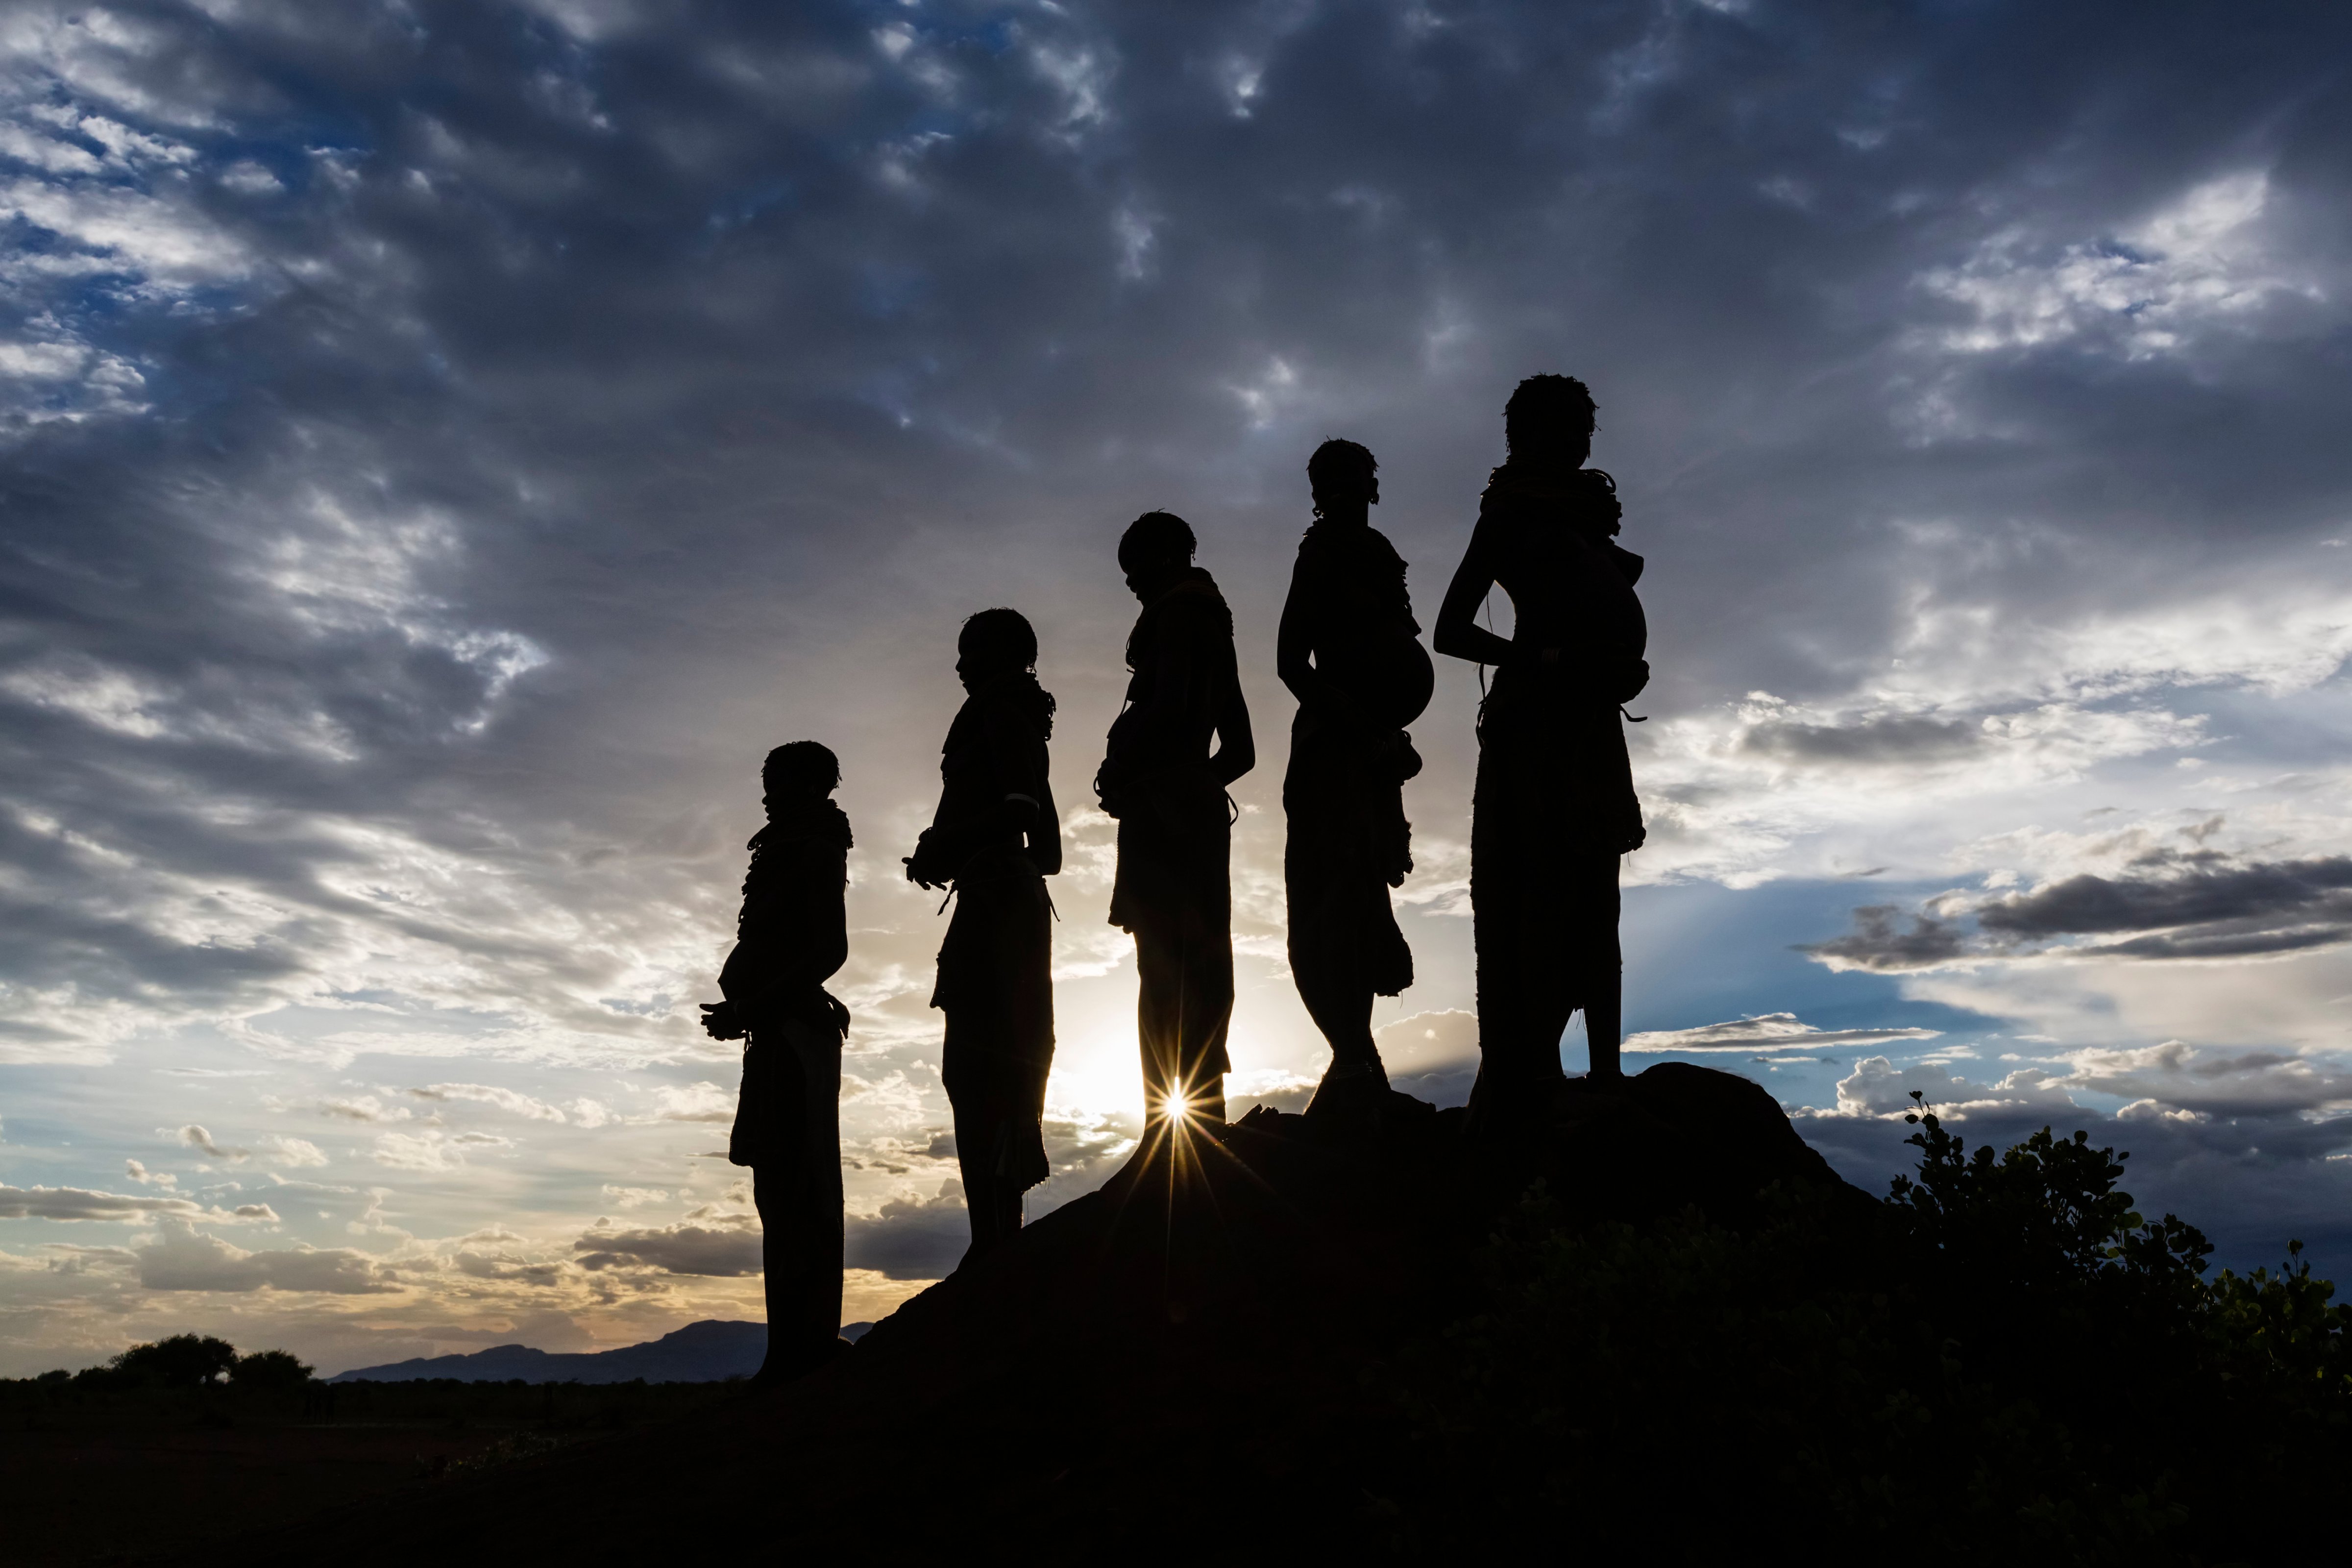 "Silhouettes of pregnant woman under cloudy sky at sunset, Nyangaton, Ethiopia" (Getty Images)